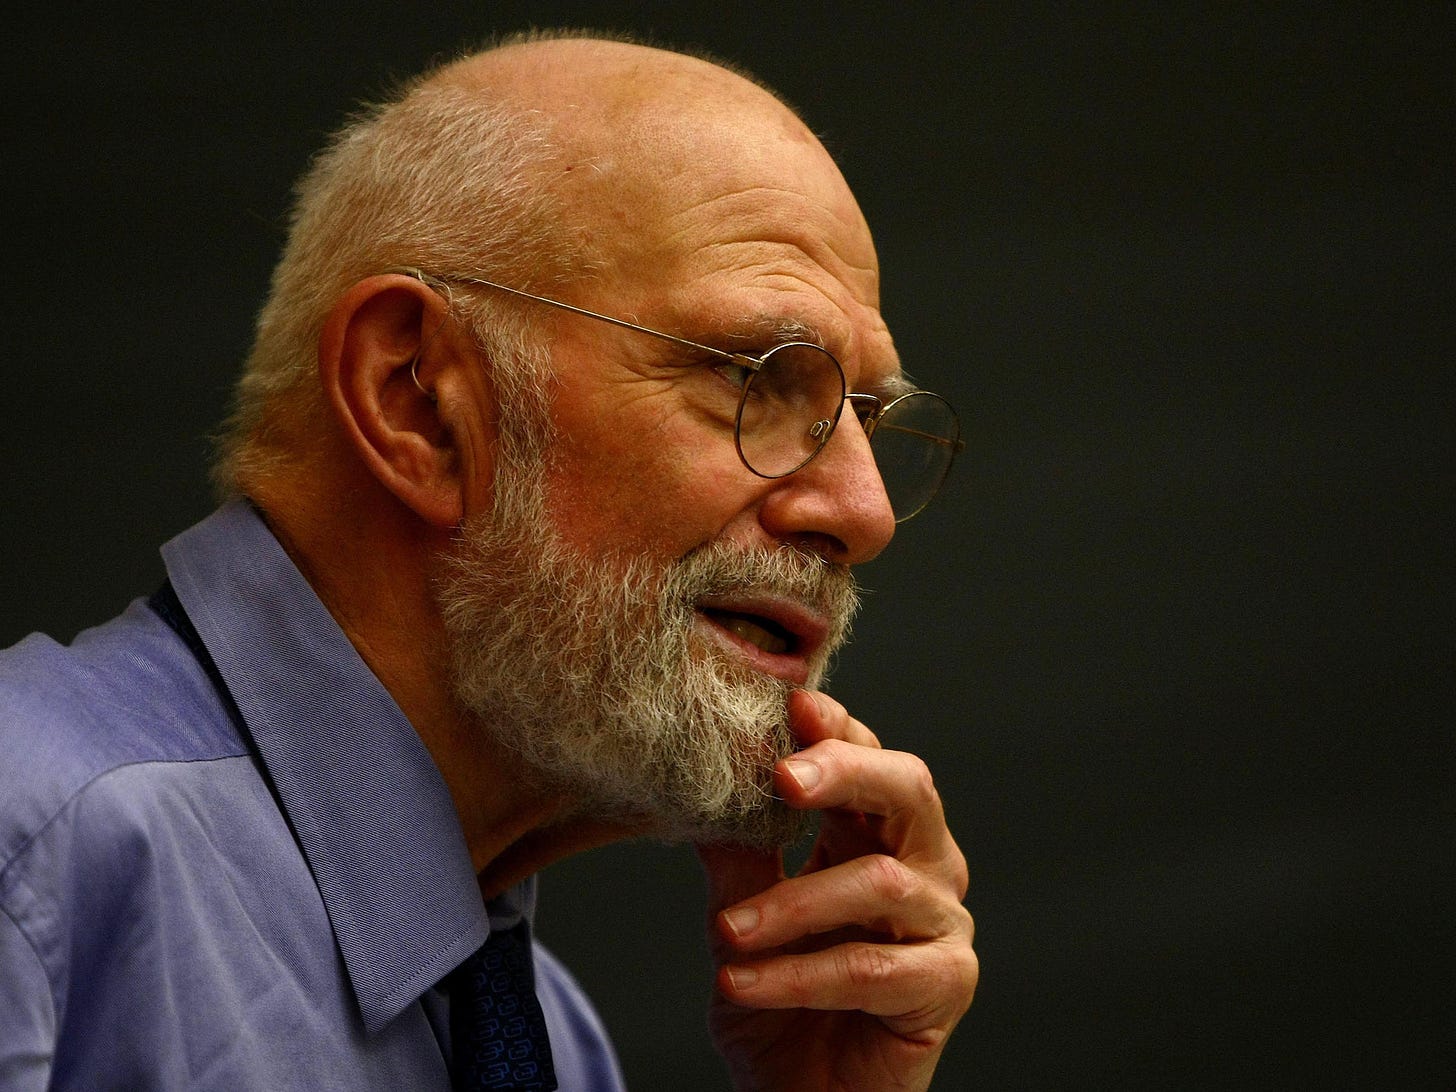 Oliver Sacks, Renowned Neurologist And Author, Dies At 82 | KBIA